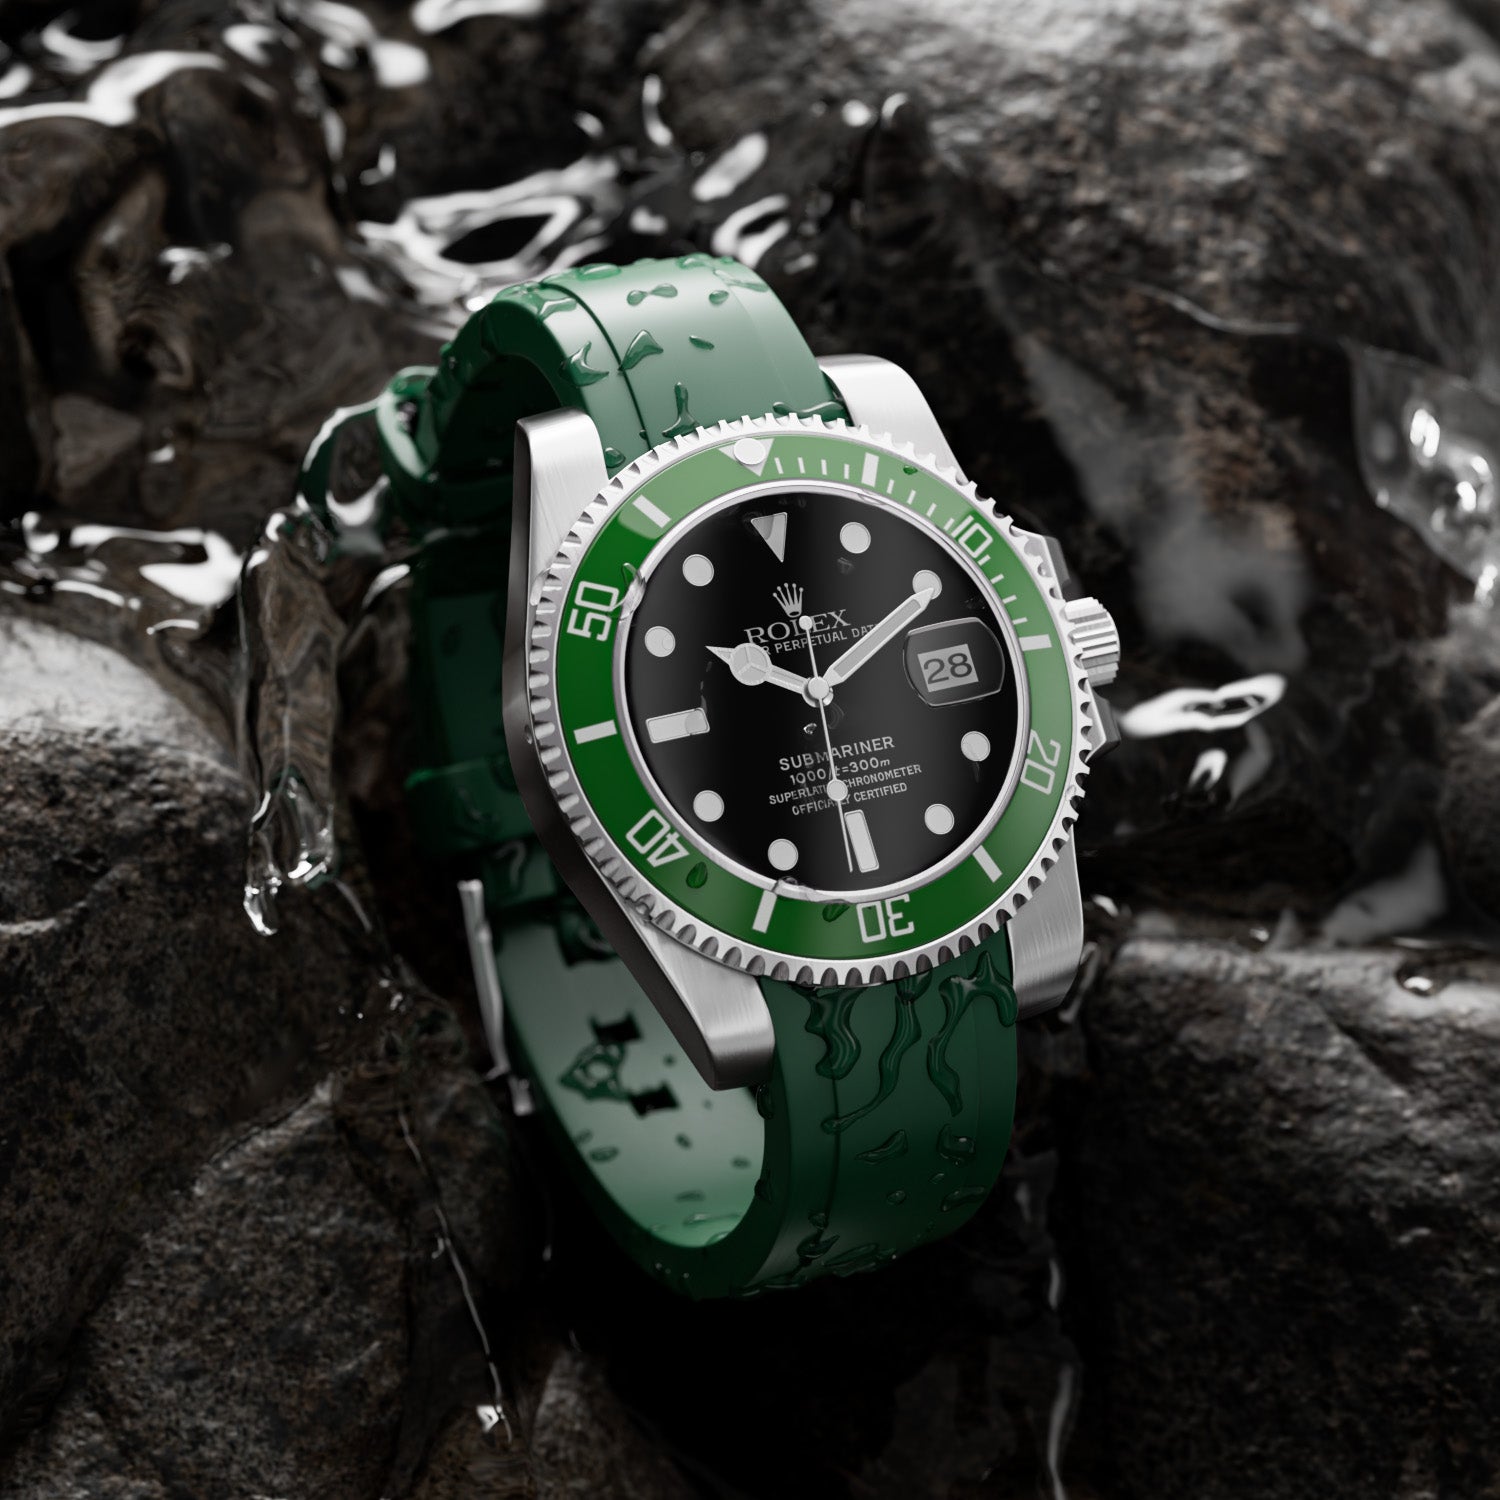 Curved End Soft Silicone Strap -  Compatible with Rolex Submariner - Dark Green (2418)